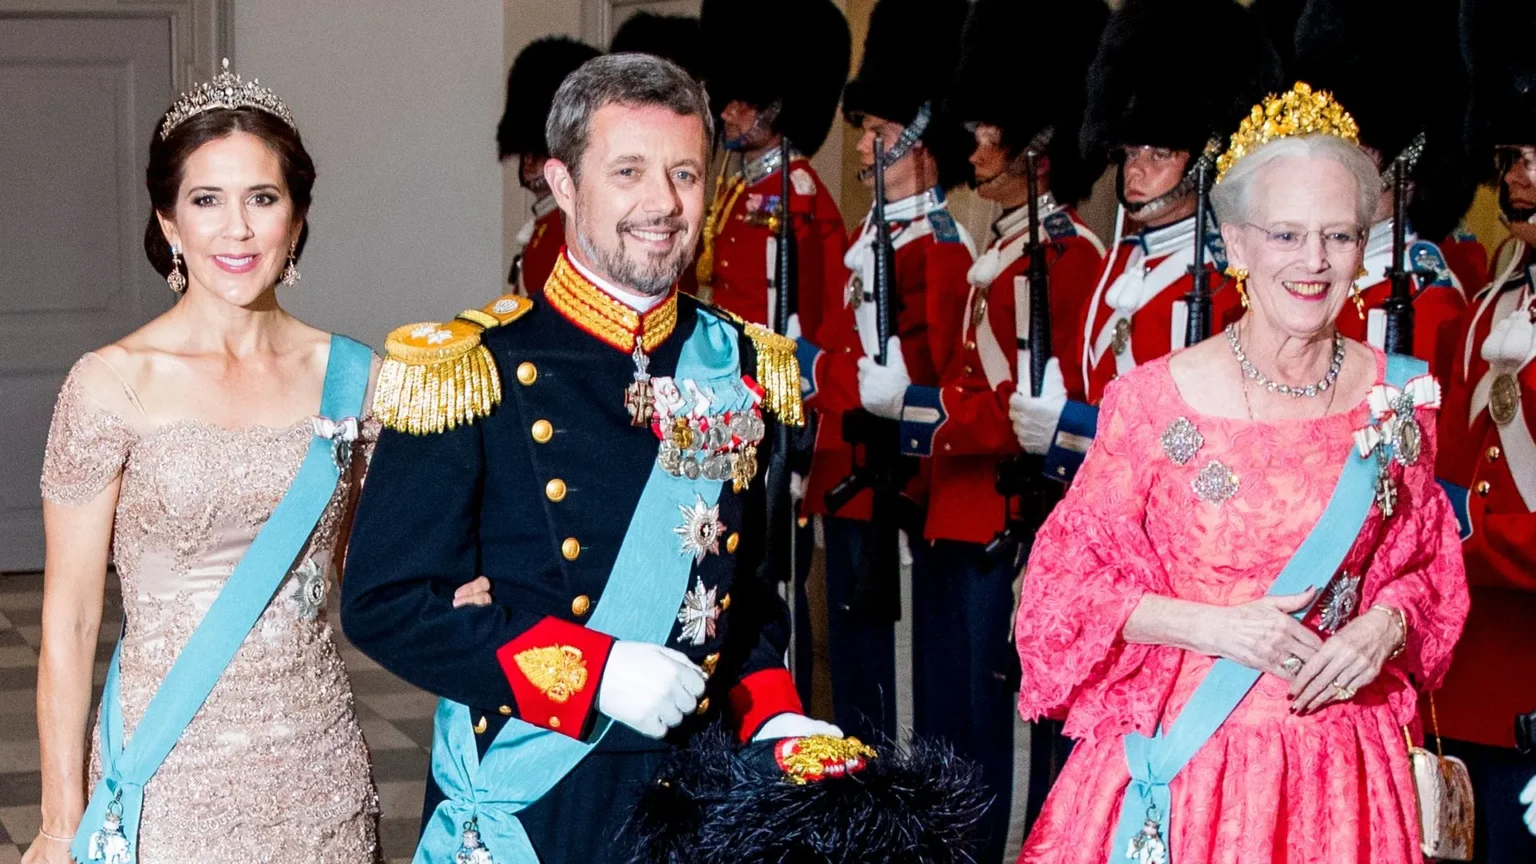 denmark-crown-prince-frederik-to-become-new-king-after-historic-abdication-of-queen-margrethe